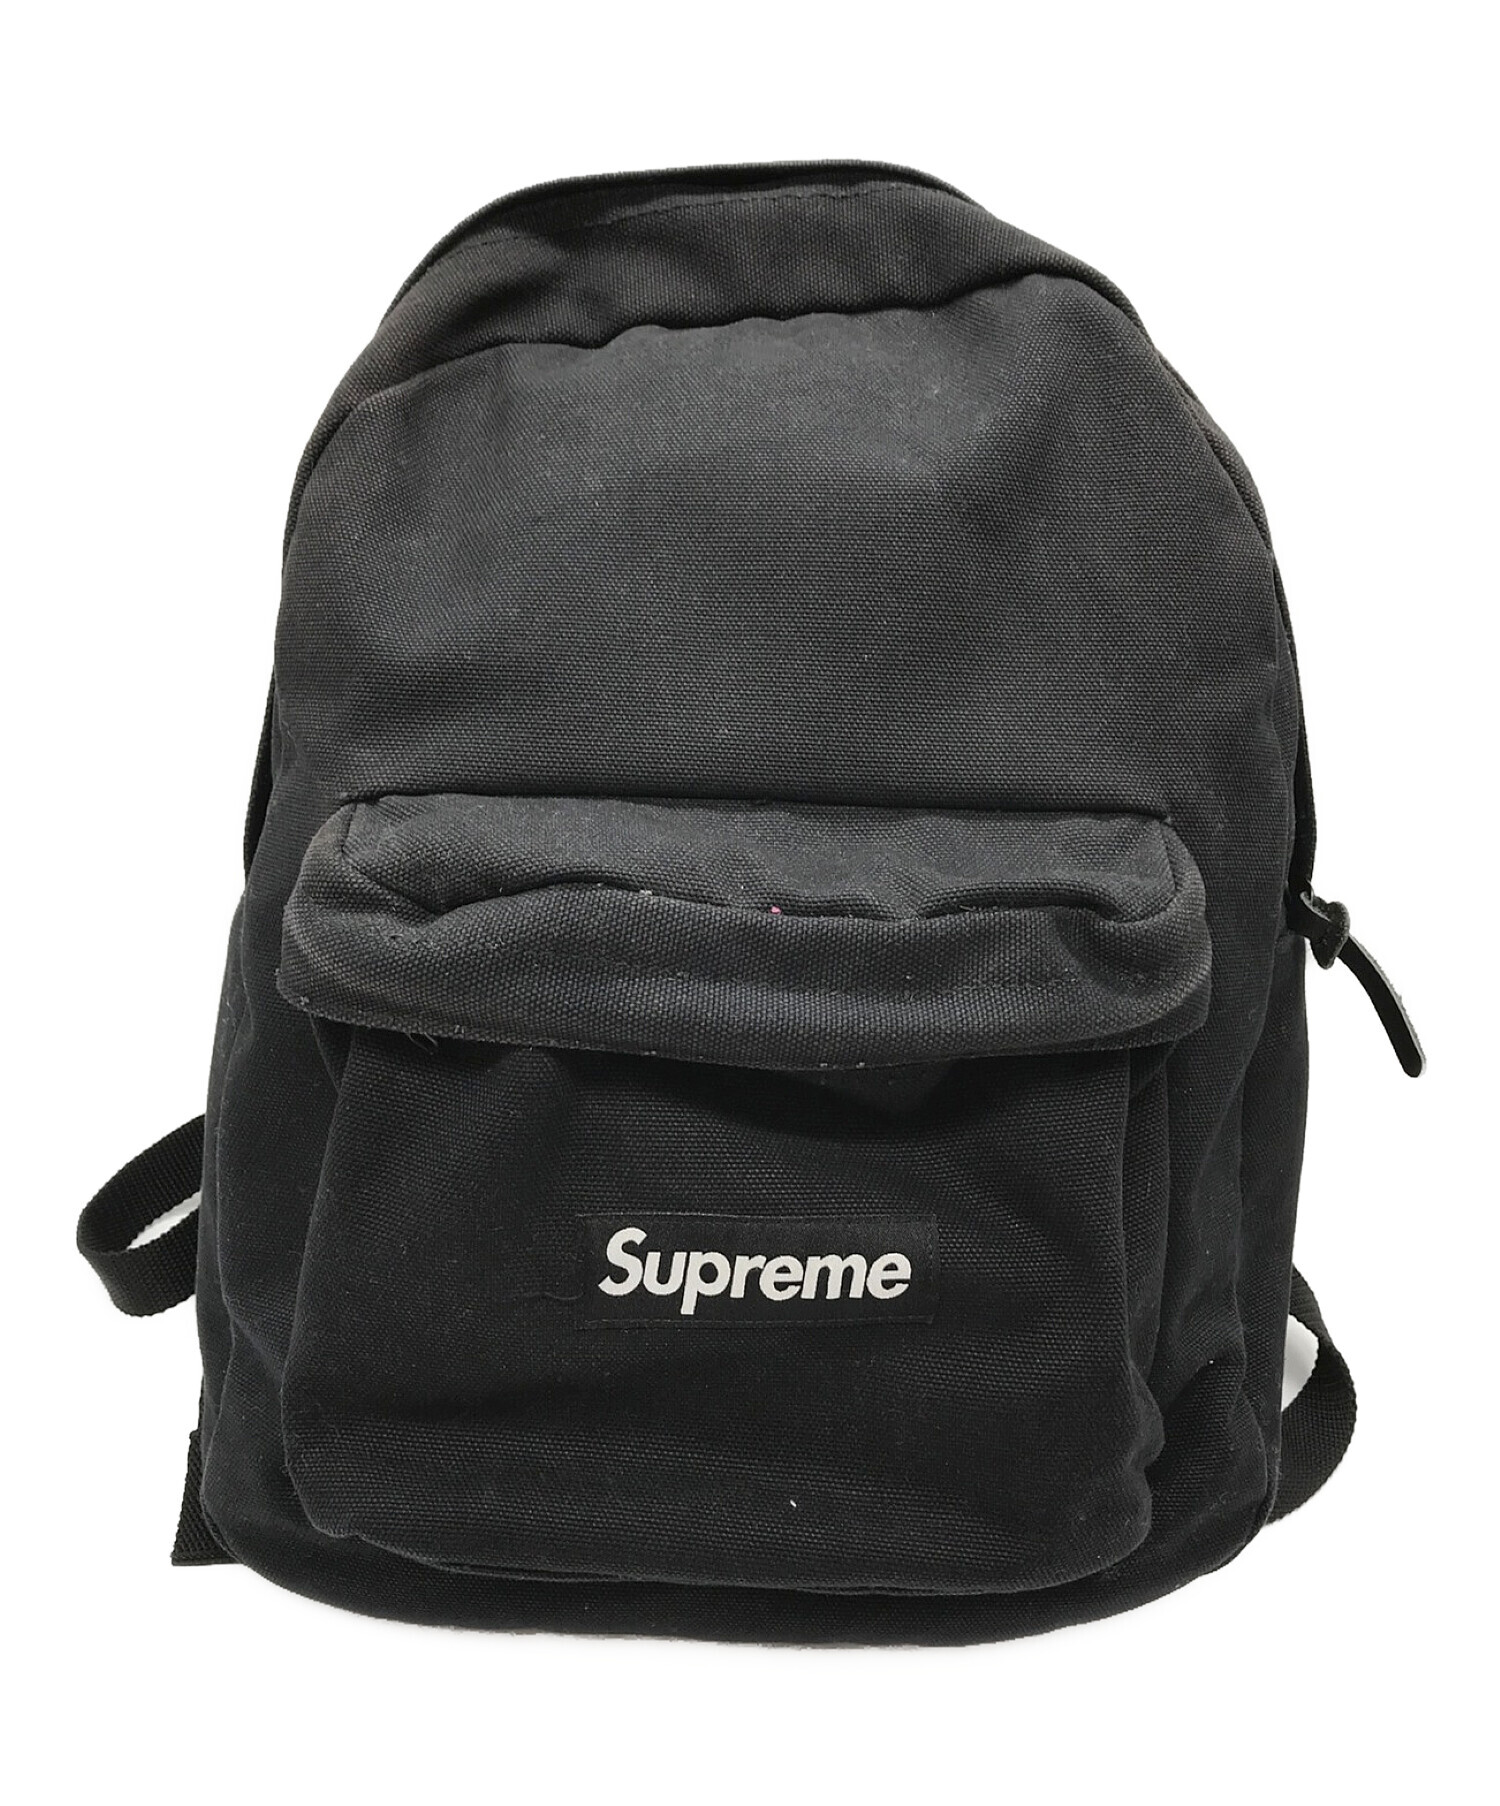 Supreme 20aw canvas backpack